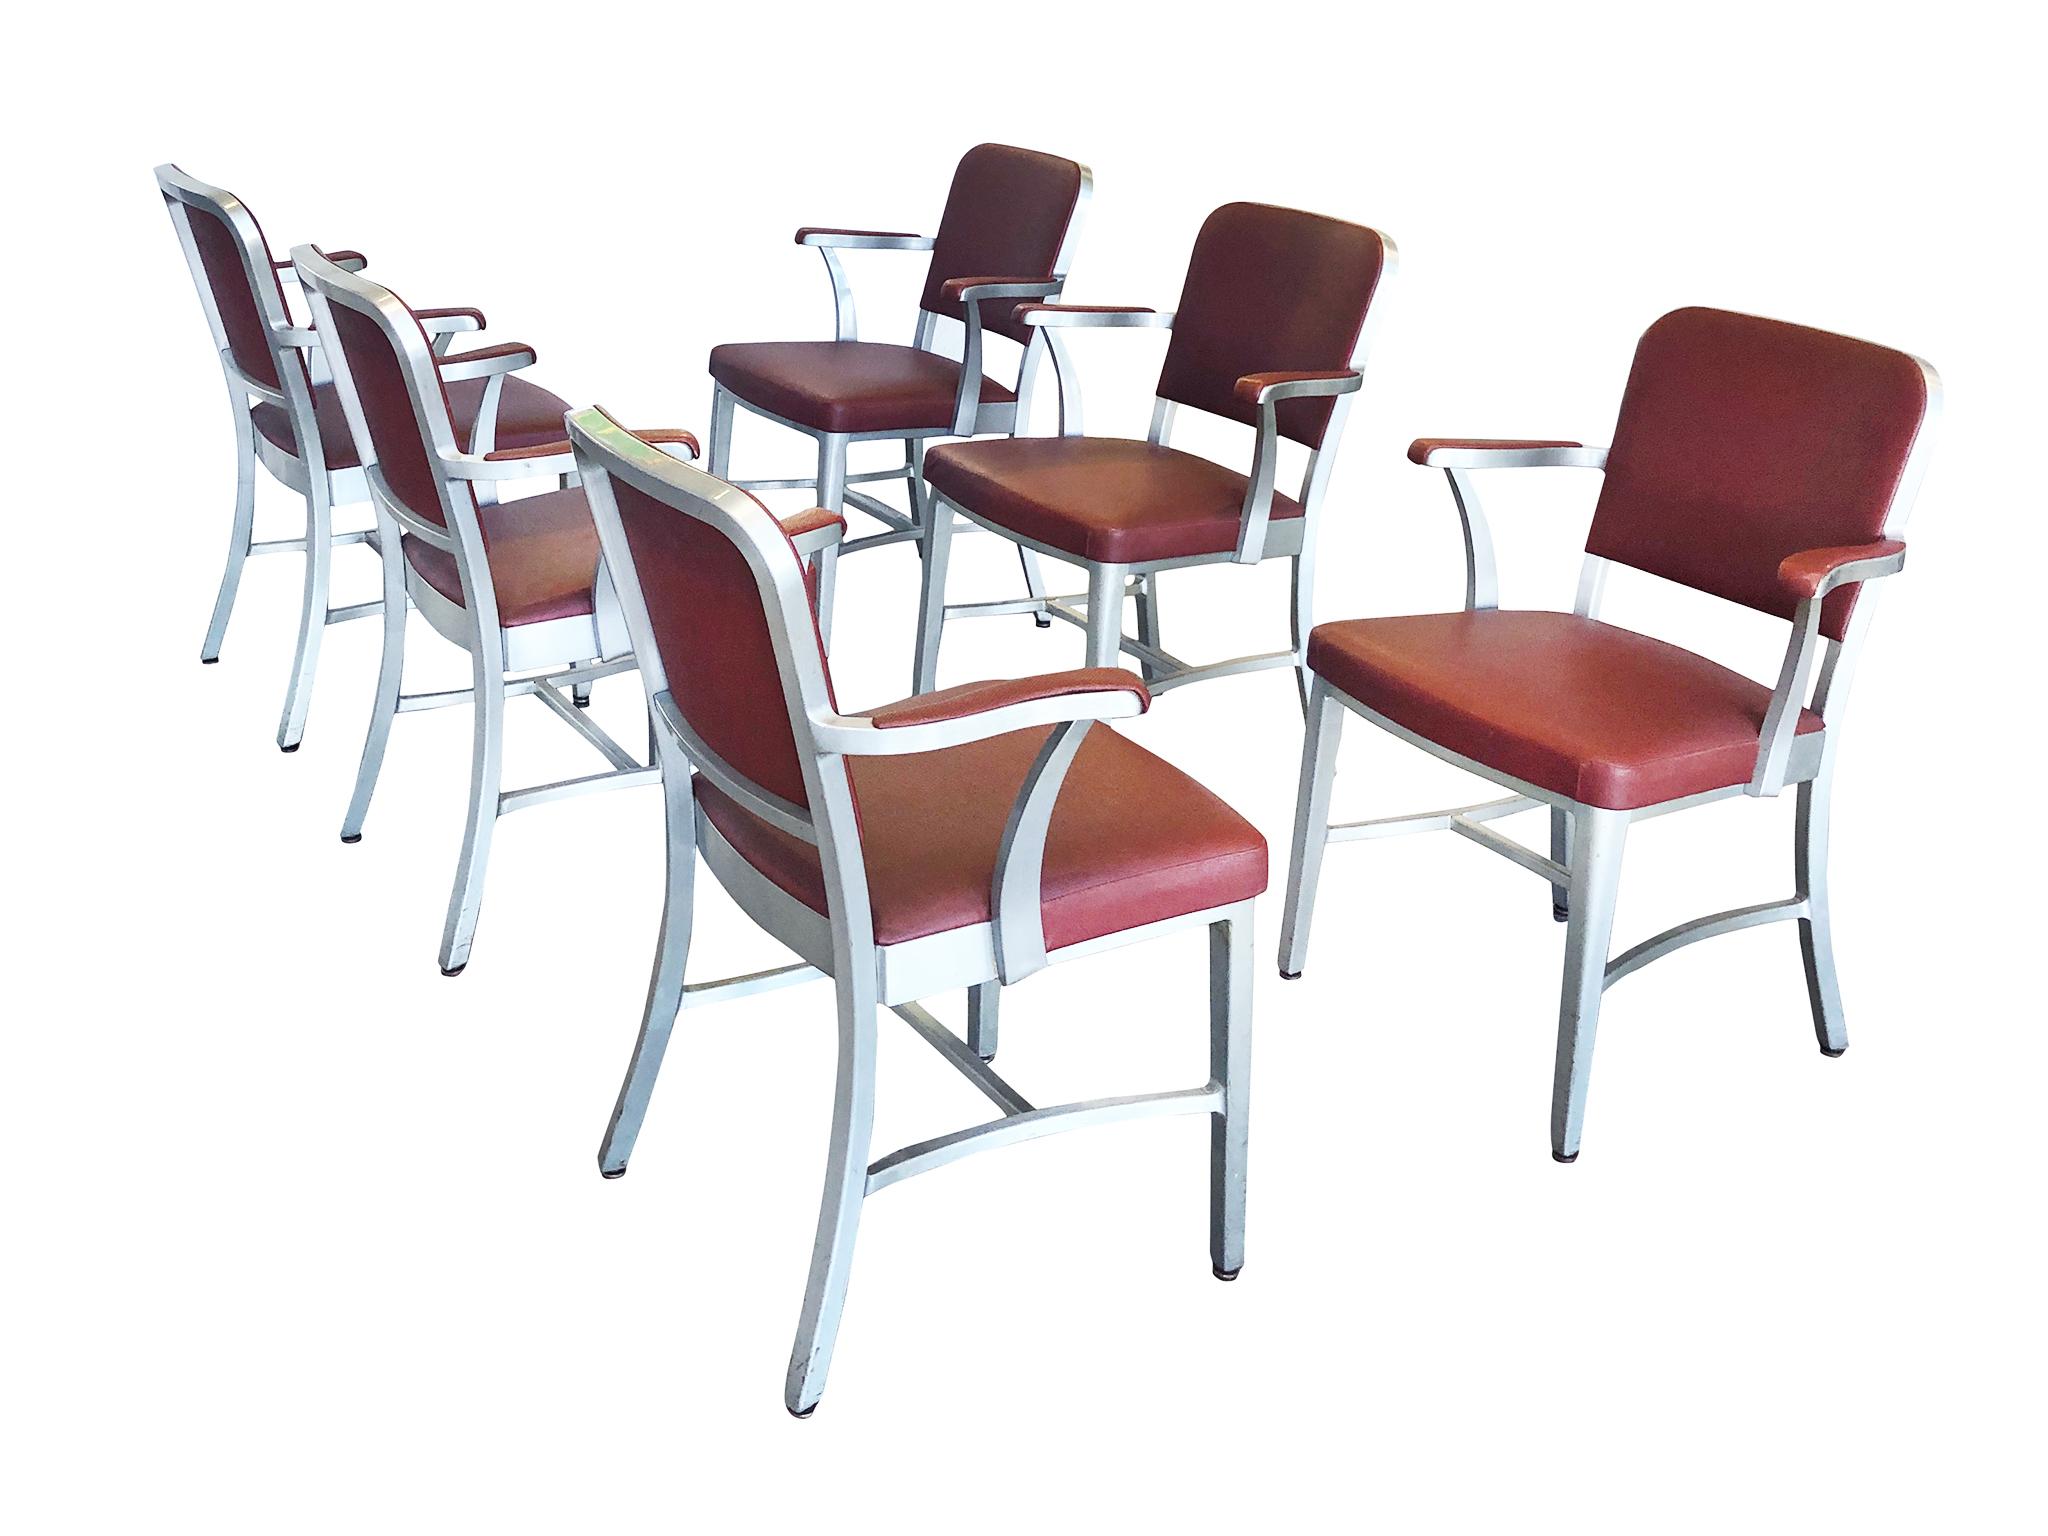 American Set of 6 GoodForm Aluminum Armchairs by the General Fireproofing Co.